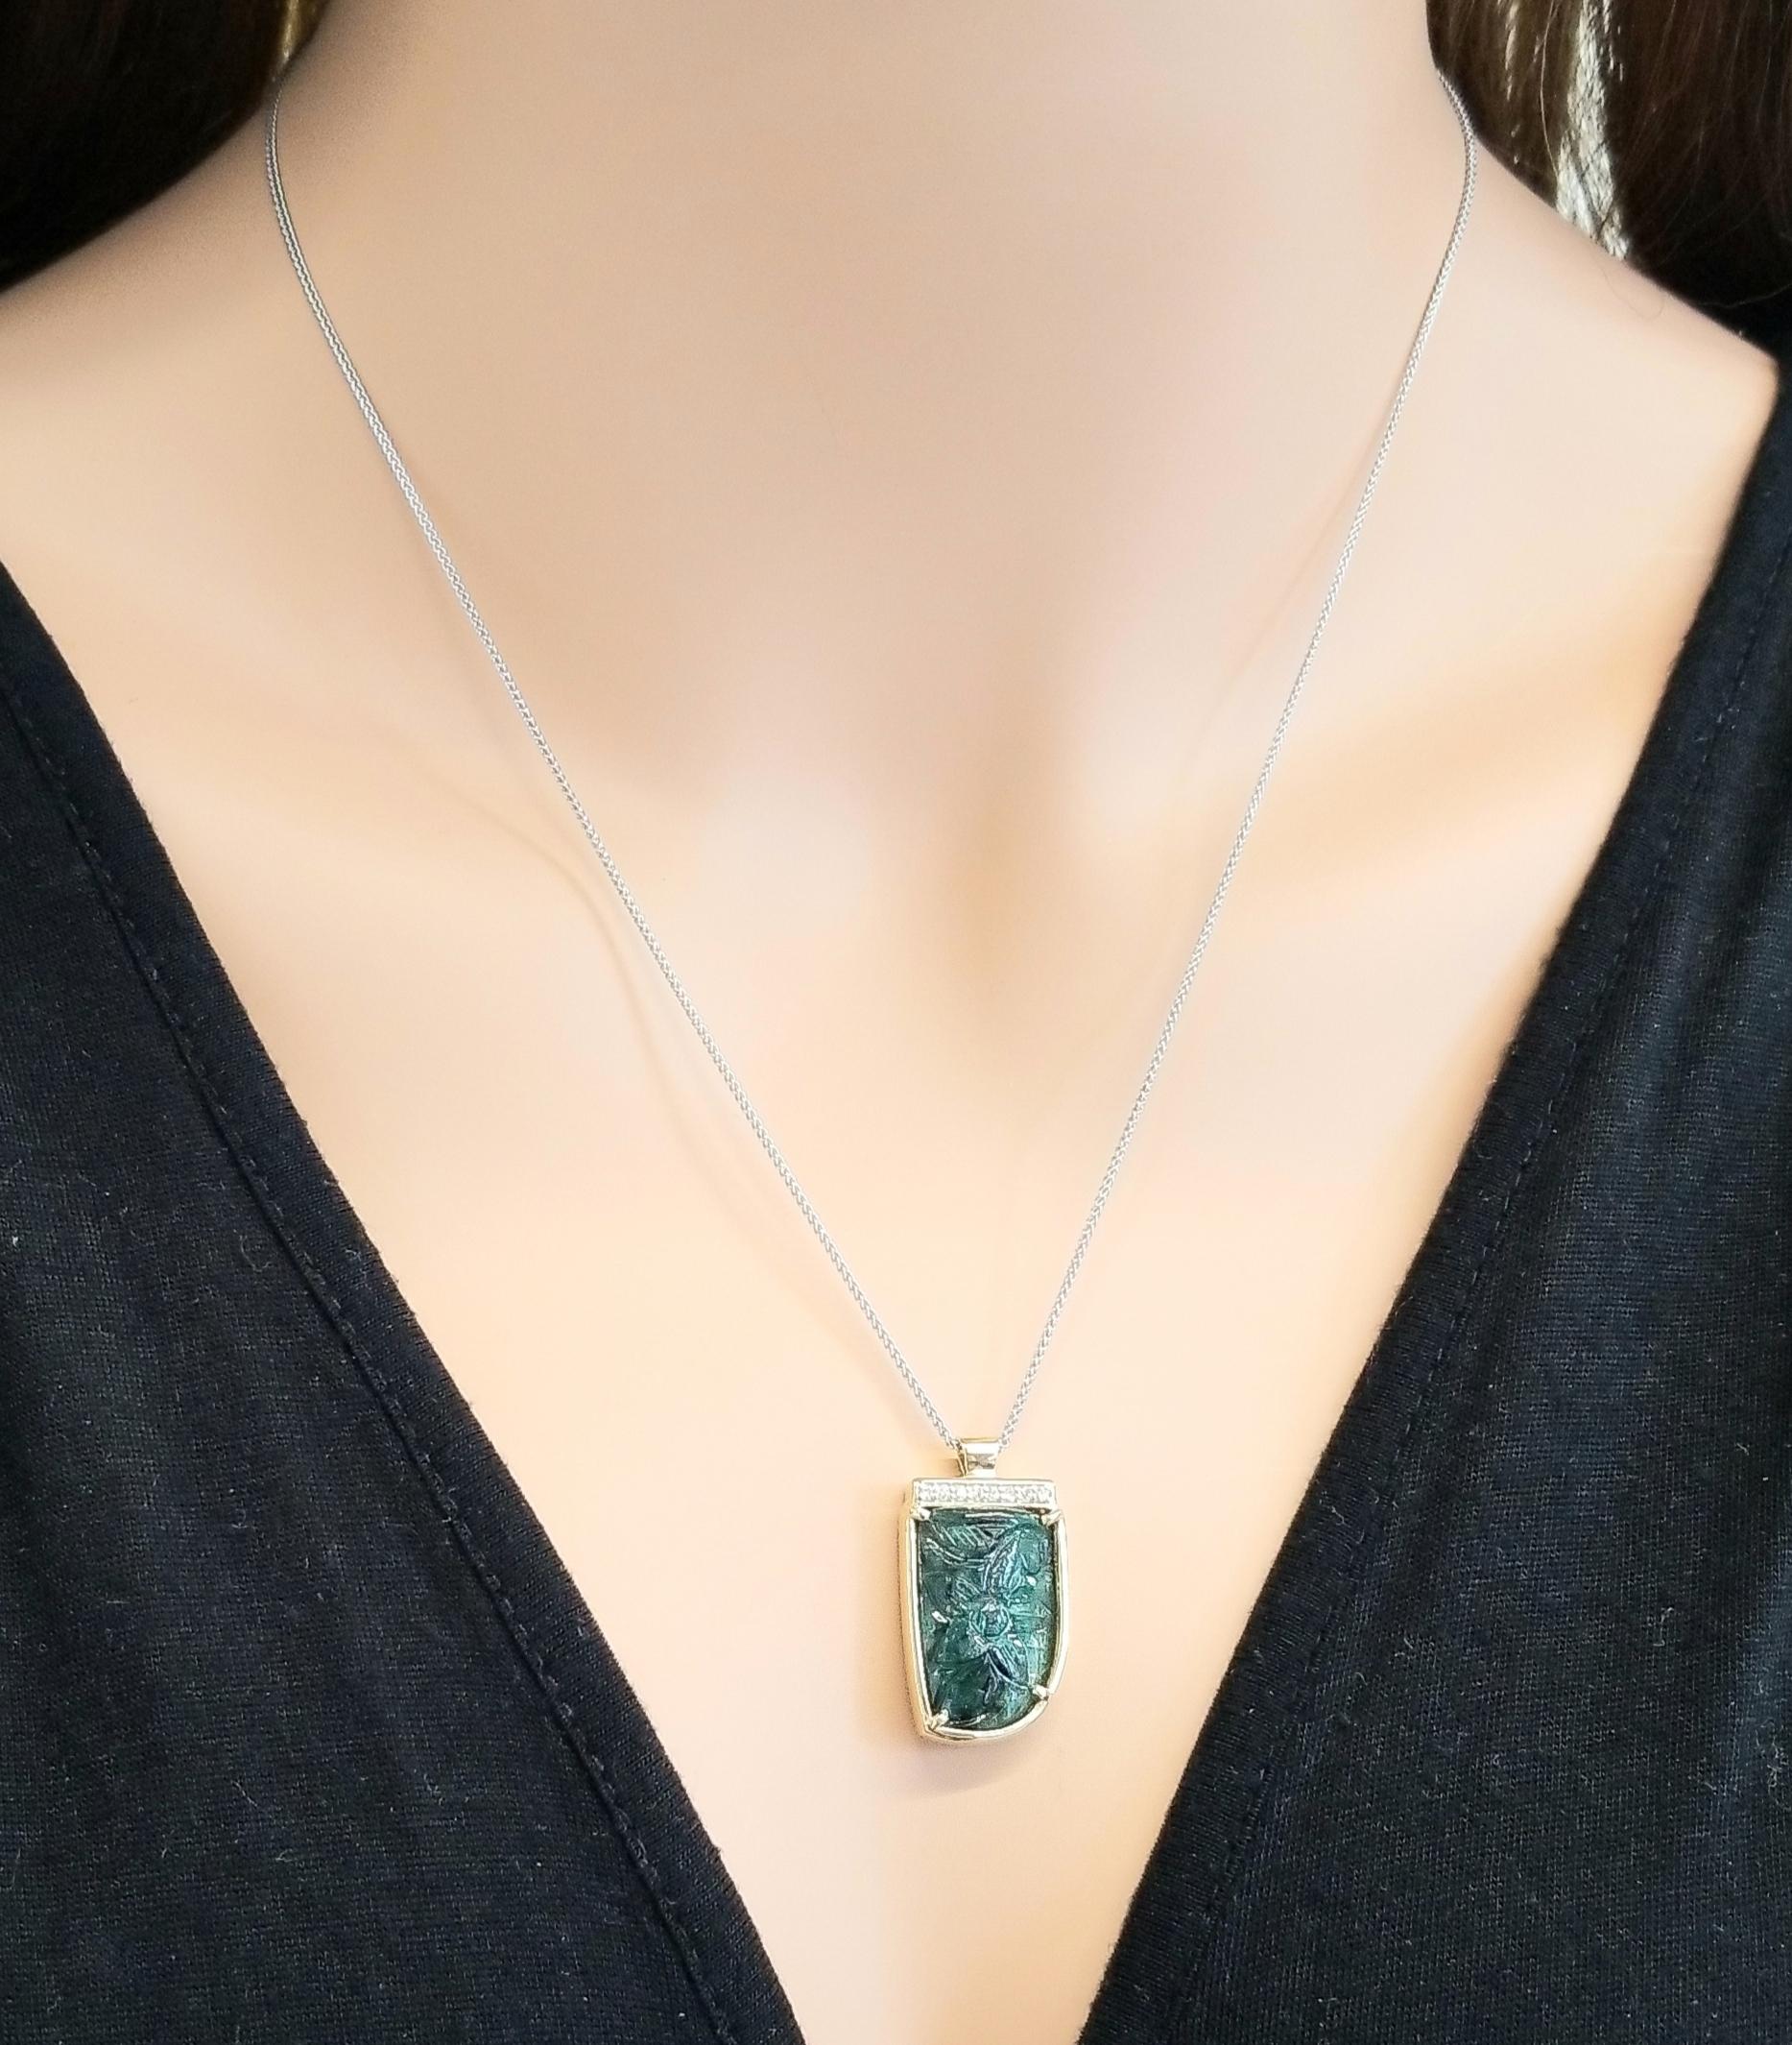 This is a 15.00 carat talisman-shaped floral carved emerald. Its gem source is Zambia; its color is gradiants of green; its translucency is excellent. Its shape is distinctly yours. A total of 0.08 carats of sparkling round brilliant cut diamonds